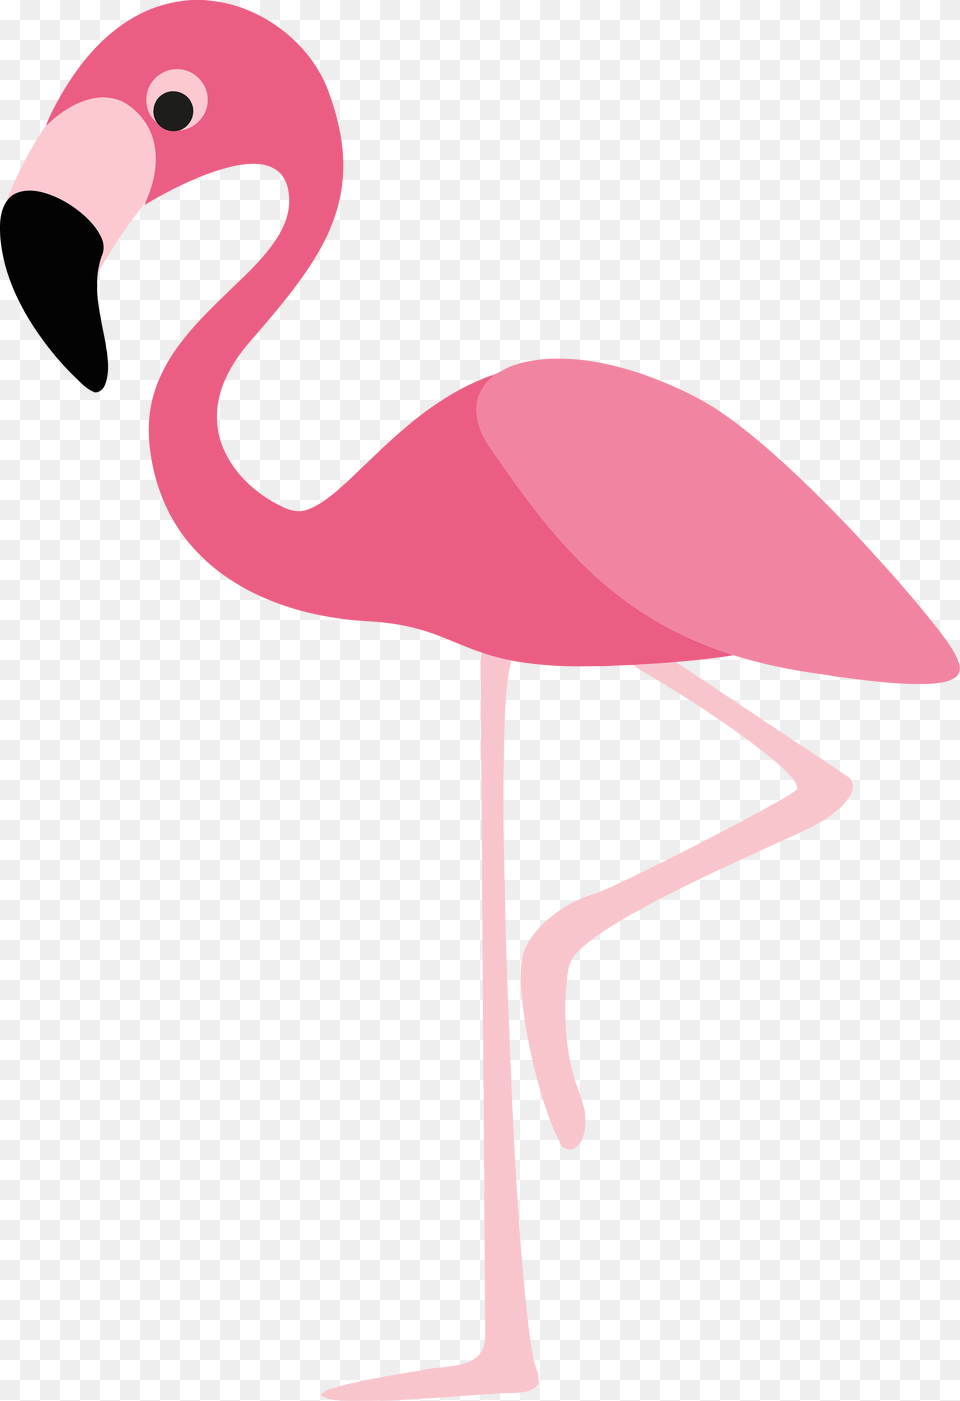 Clipartly Flamingo Cartoon Royalty Clip Art Flamingo Flamingo Cartoon, Animal, Bird, Fish, Sea Life Free Png Download